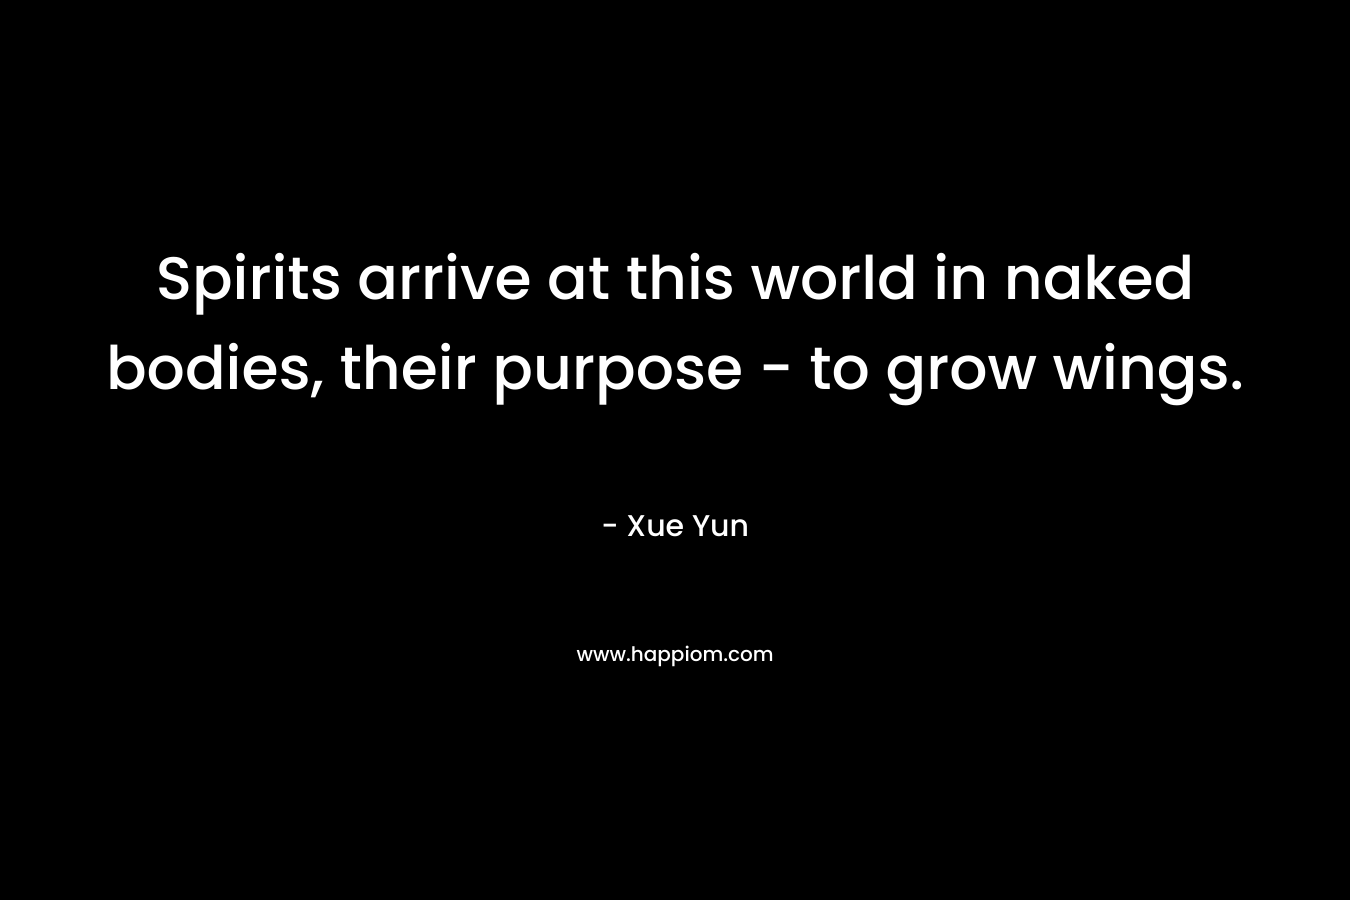 Spirits arrive at this world in naked bodies, their purpose - to grow wings.